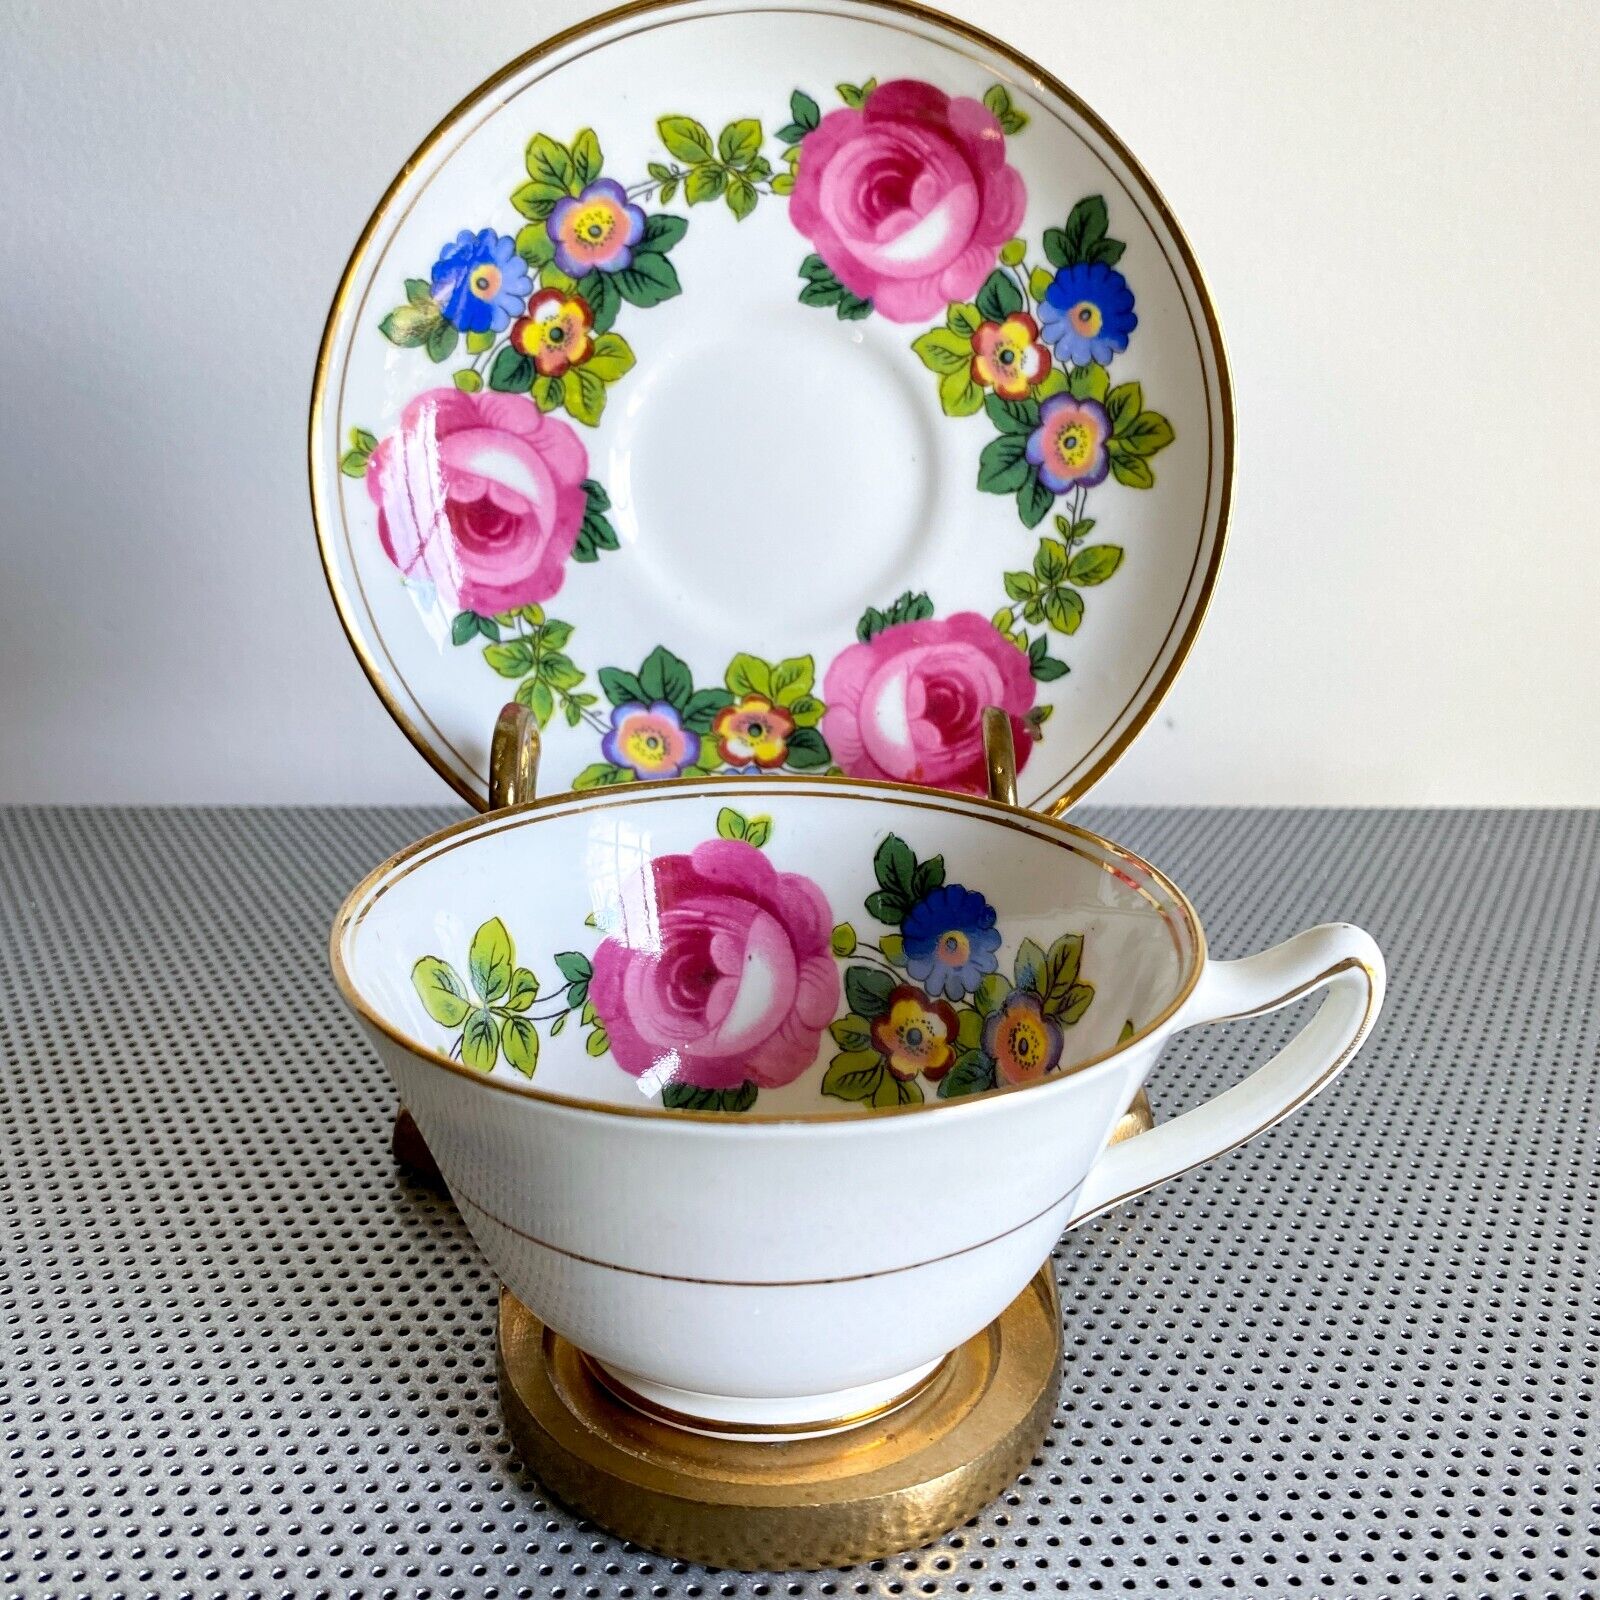 Vtg Paragon Cup & Saucer By Appointment Double Warrant HM Queen Mary England